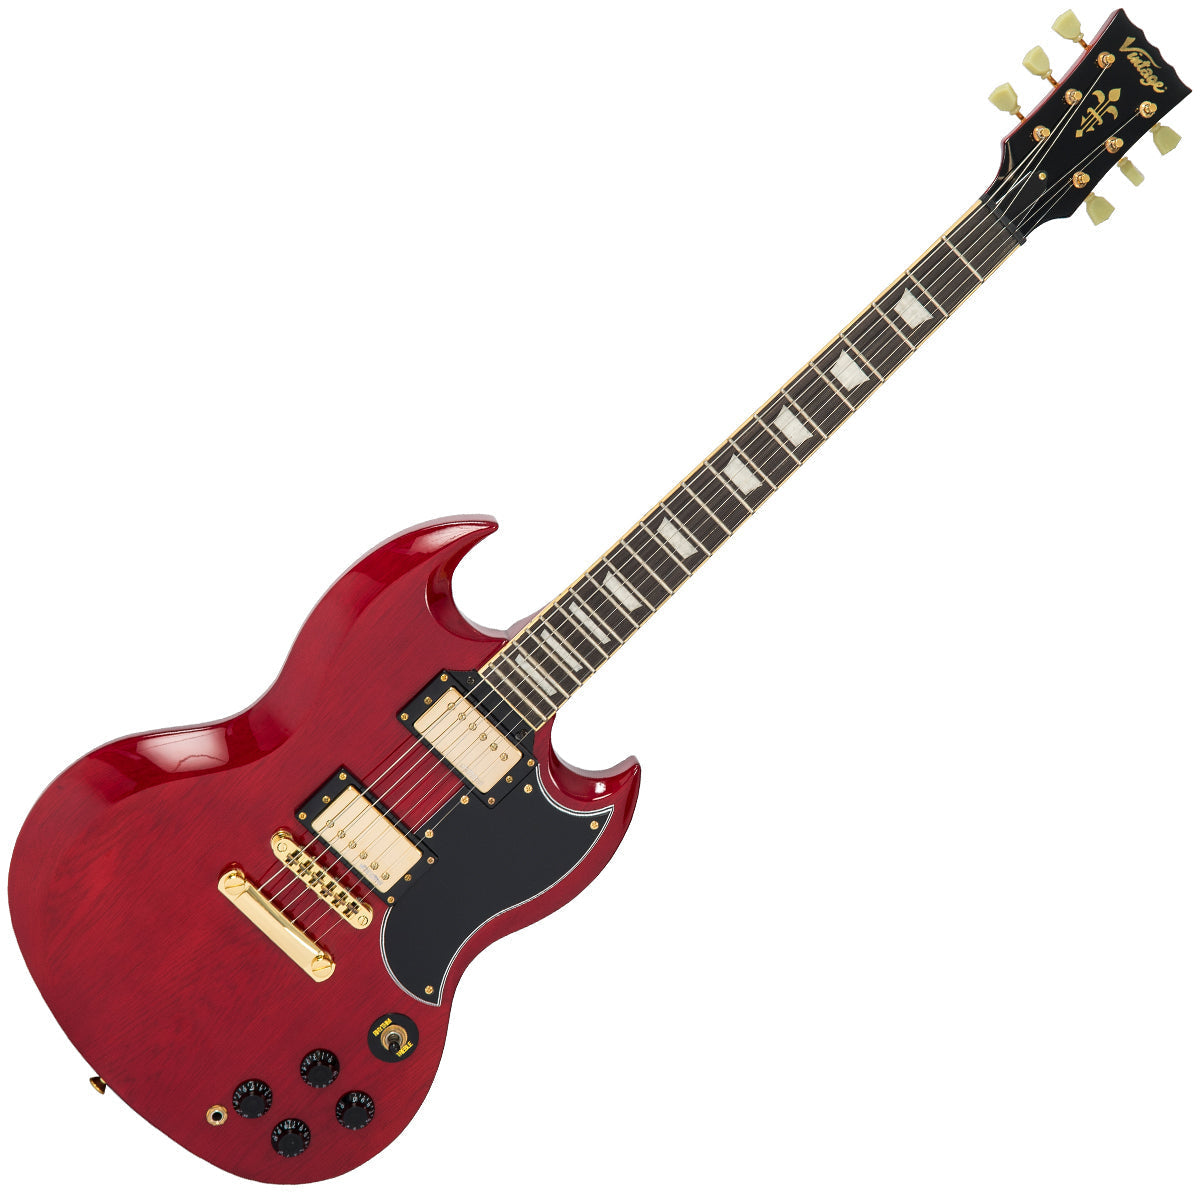 Vintage VS6 ReIssued Electric Guitar ~ Cherry Red/Gold Hardware, Electric Guitar for sale at Richards Guitars.